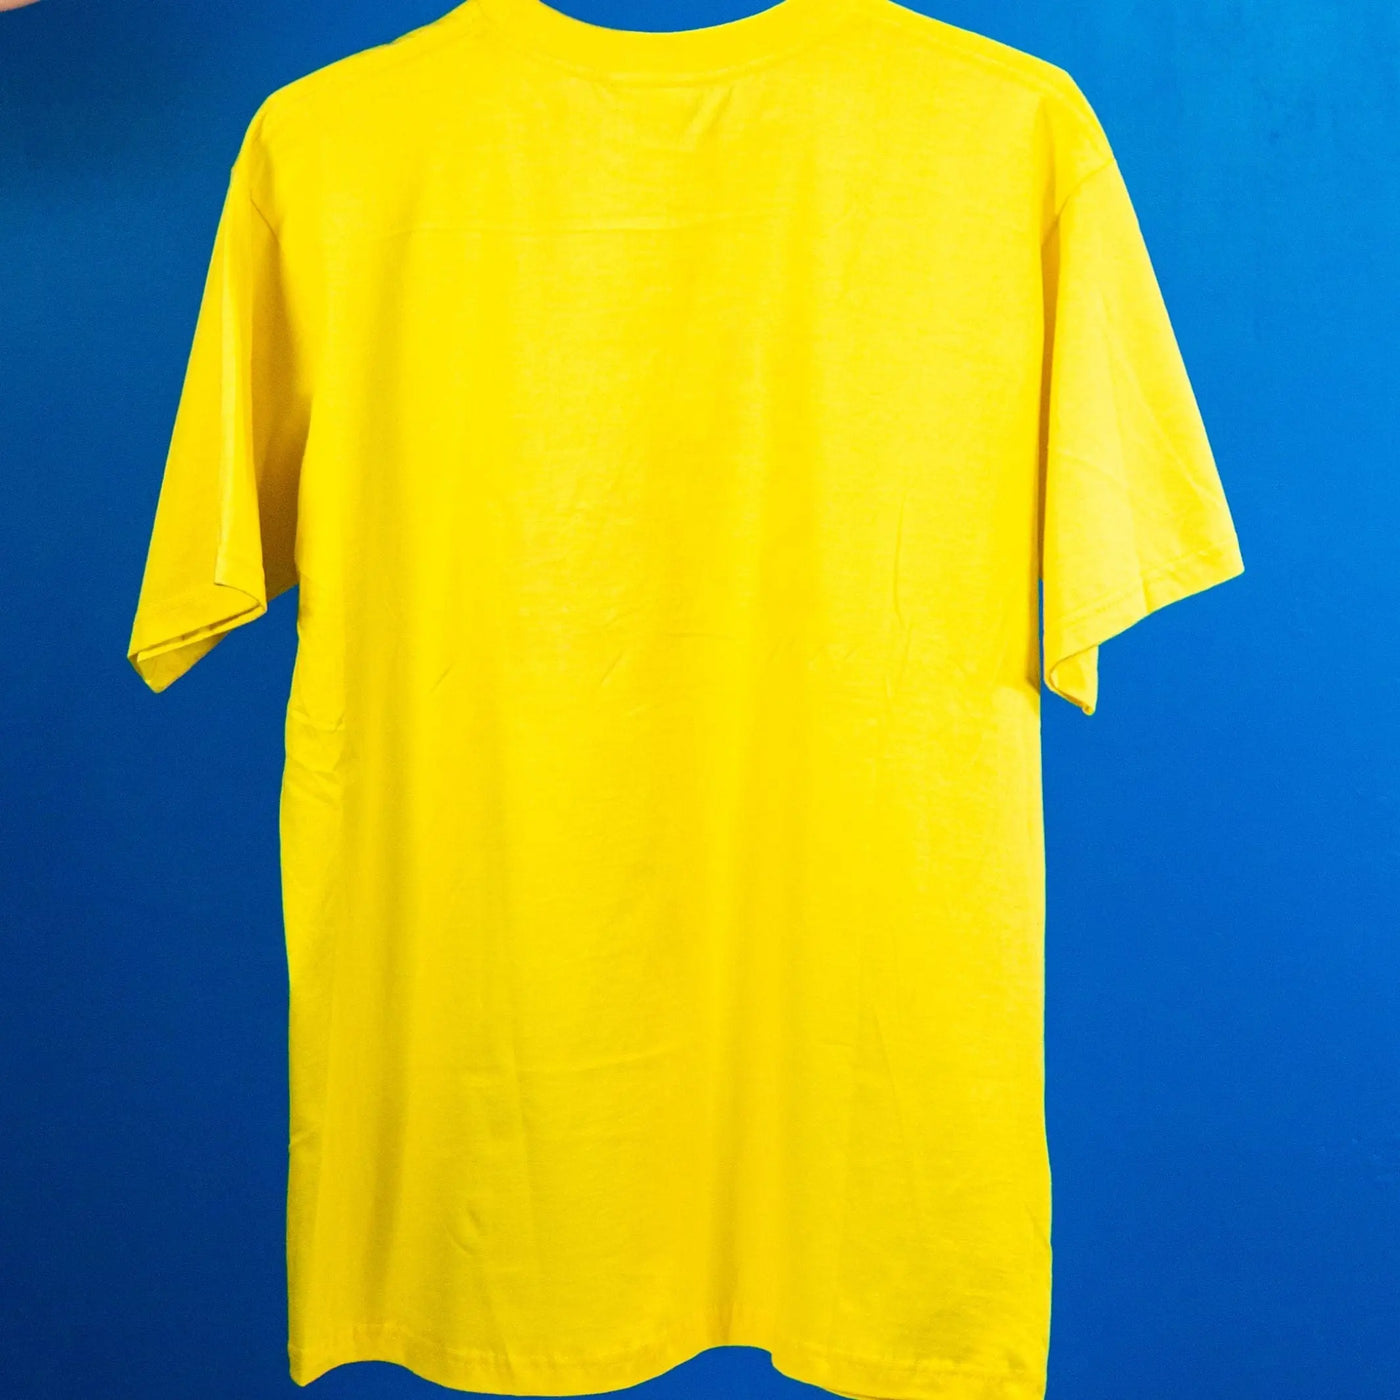 Embroidered T-shirt: Fool of a Kind - Yellow/Red - Migration Museum Shop